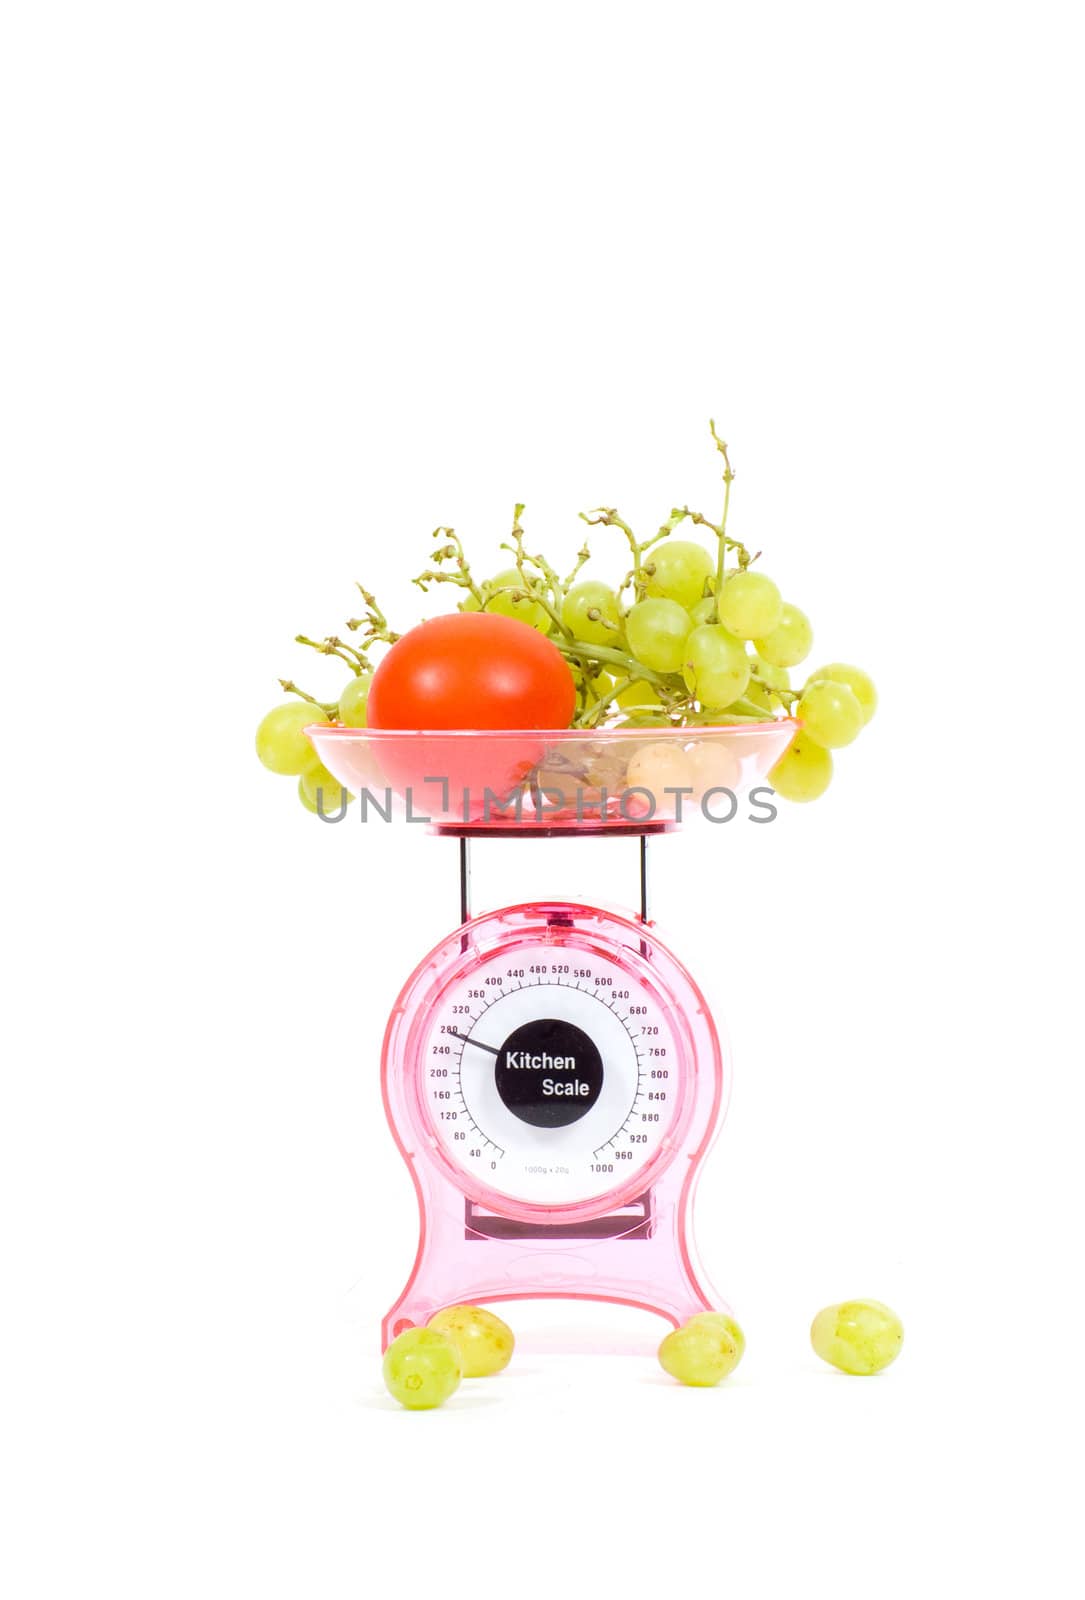 Kitchen Scales with fresh tomatoes and grapes  isolated over white